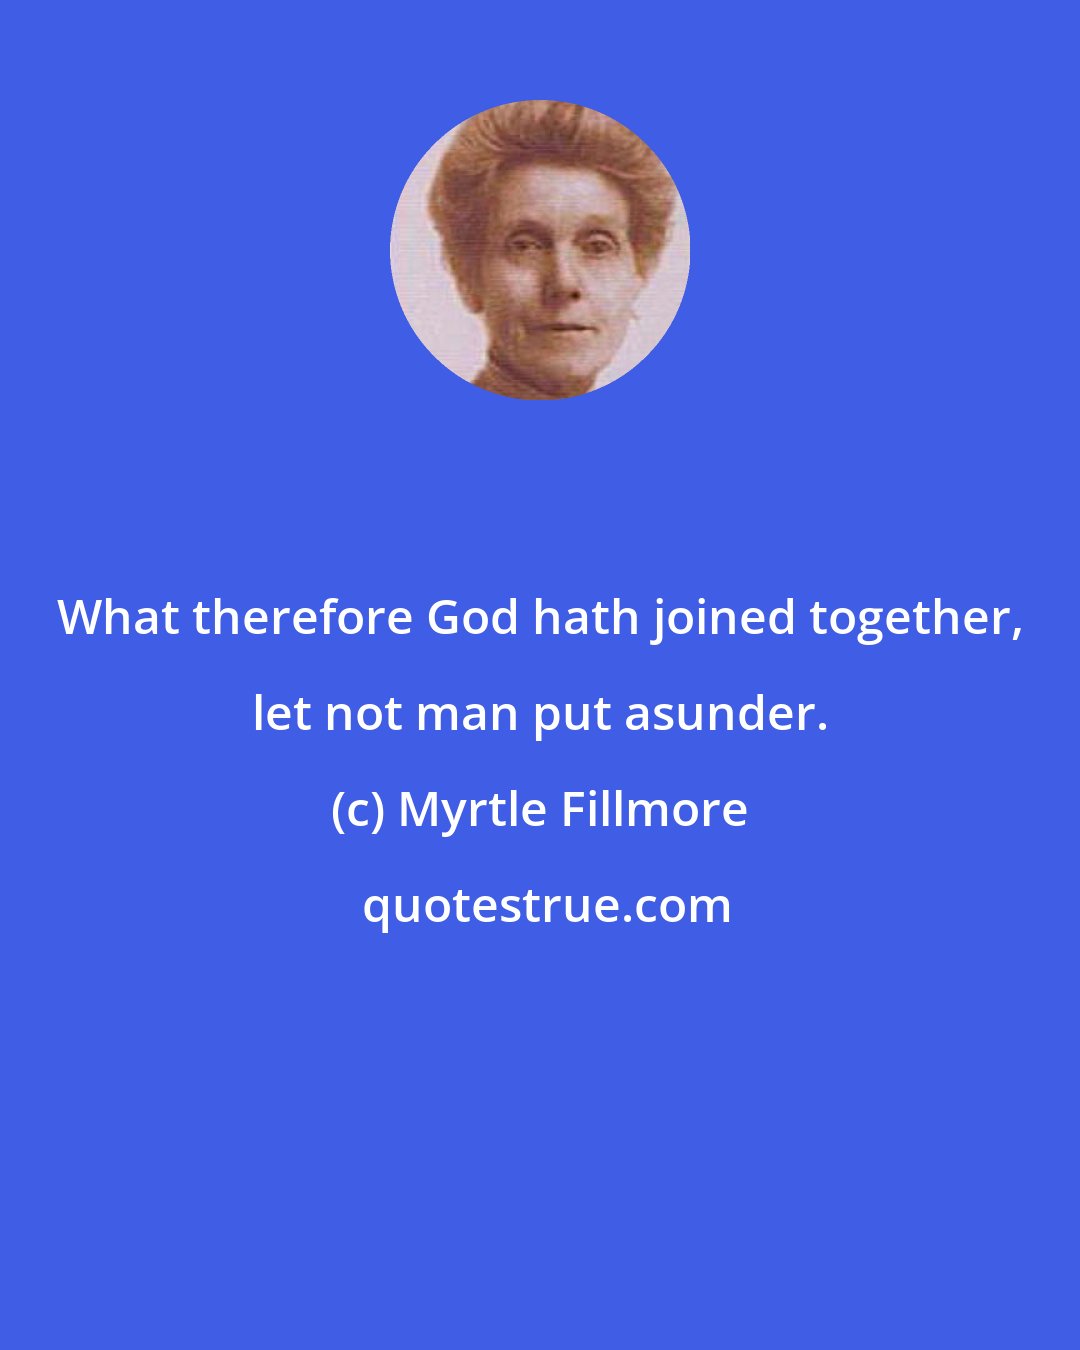 Myrtle Fillmore: What therefore God hath joined together, let not man put asunder.